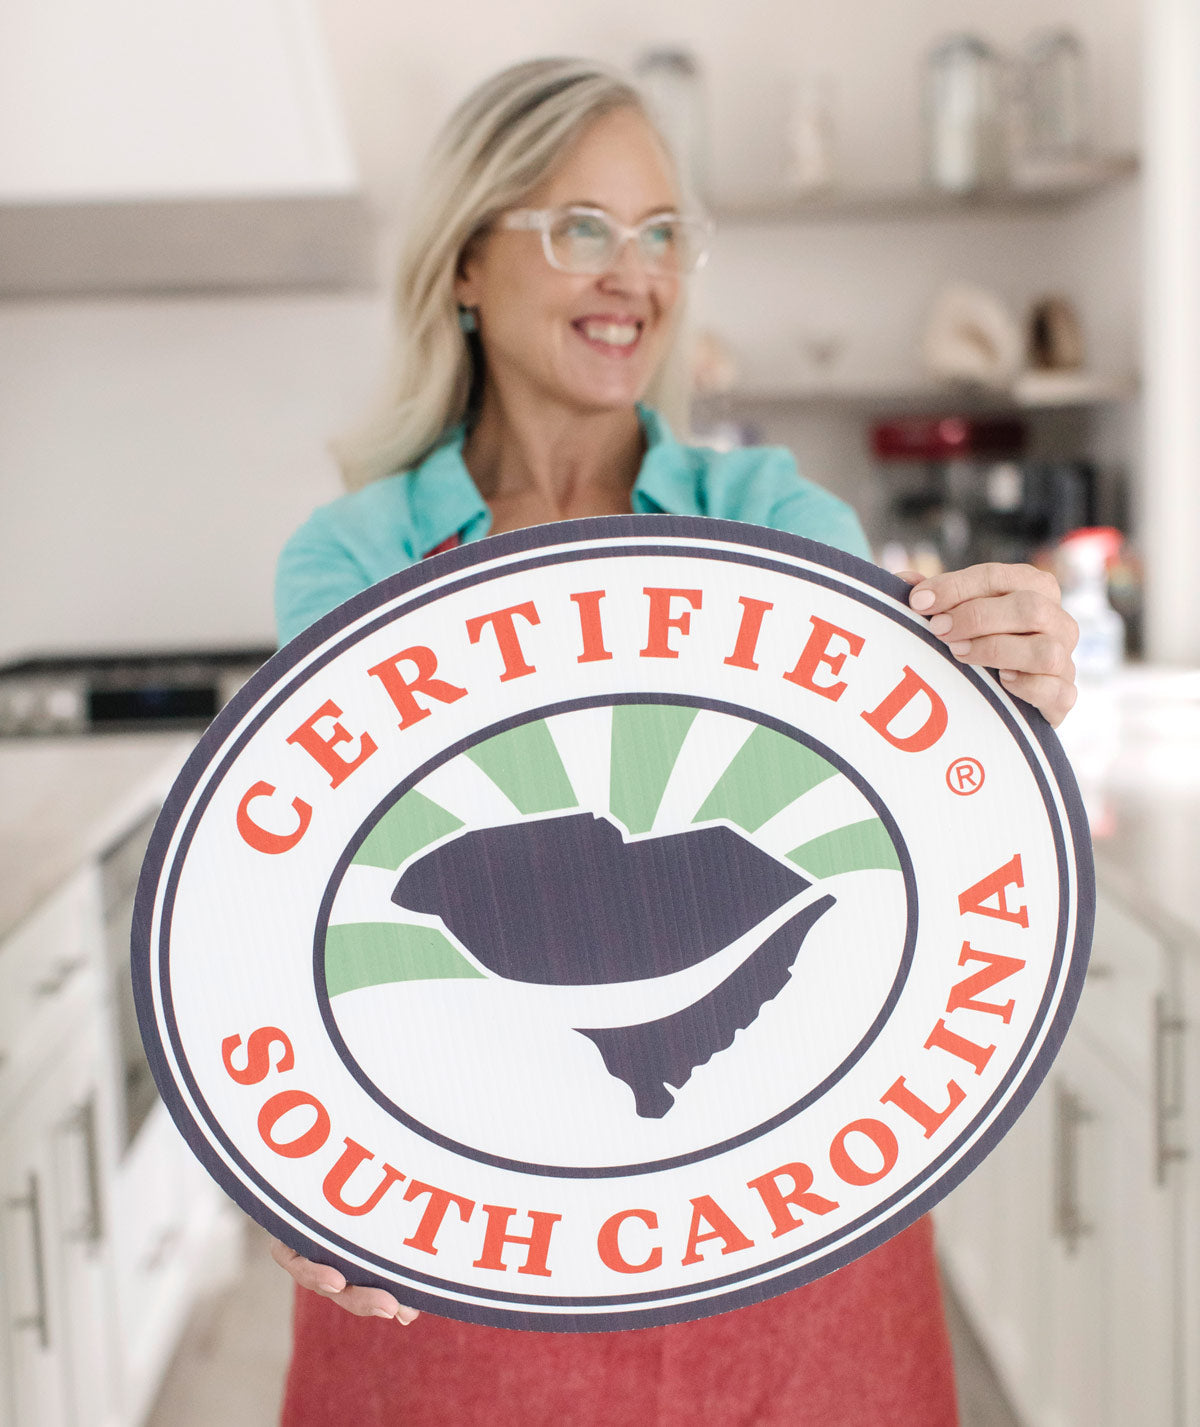 Minde Herbert, owner of Sea Island Organics, holds out a Certified South Carolina sign in her kitchen.